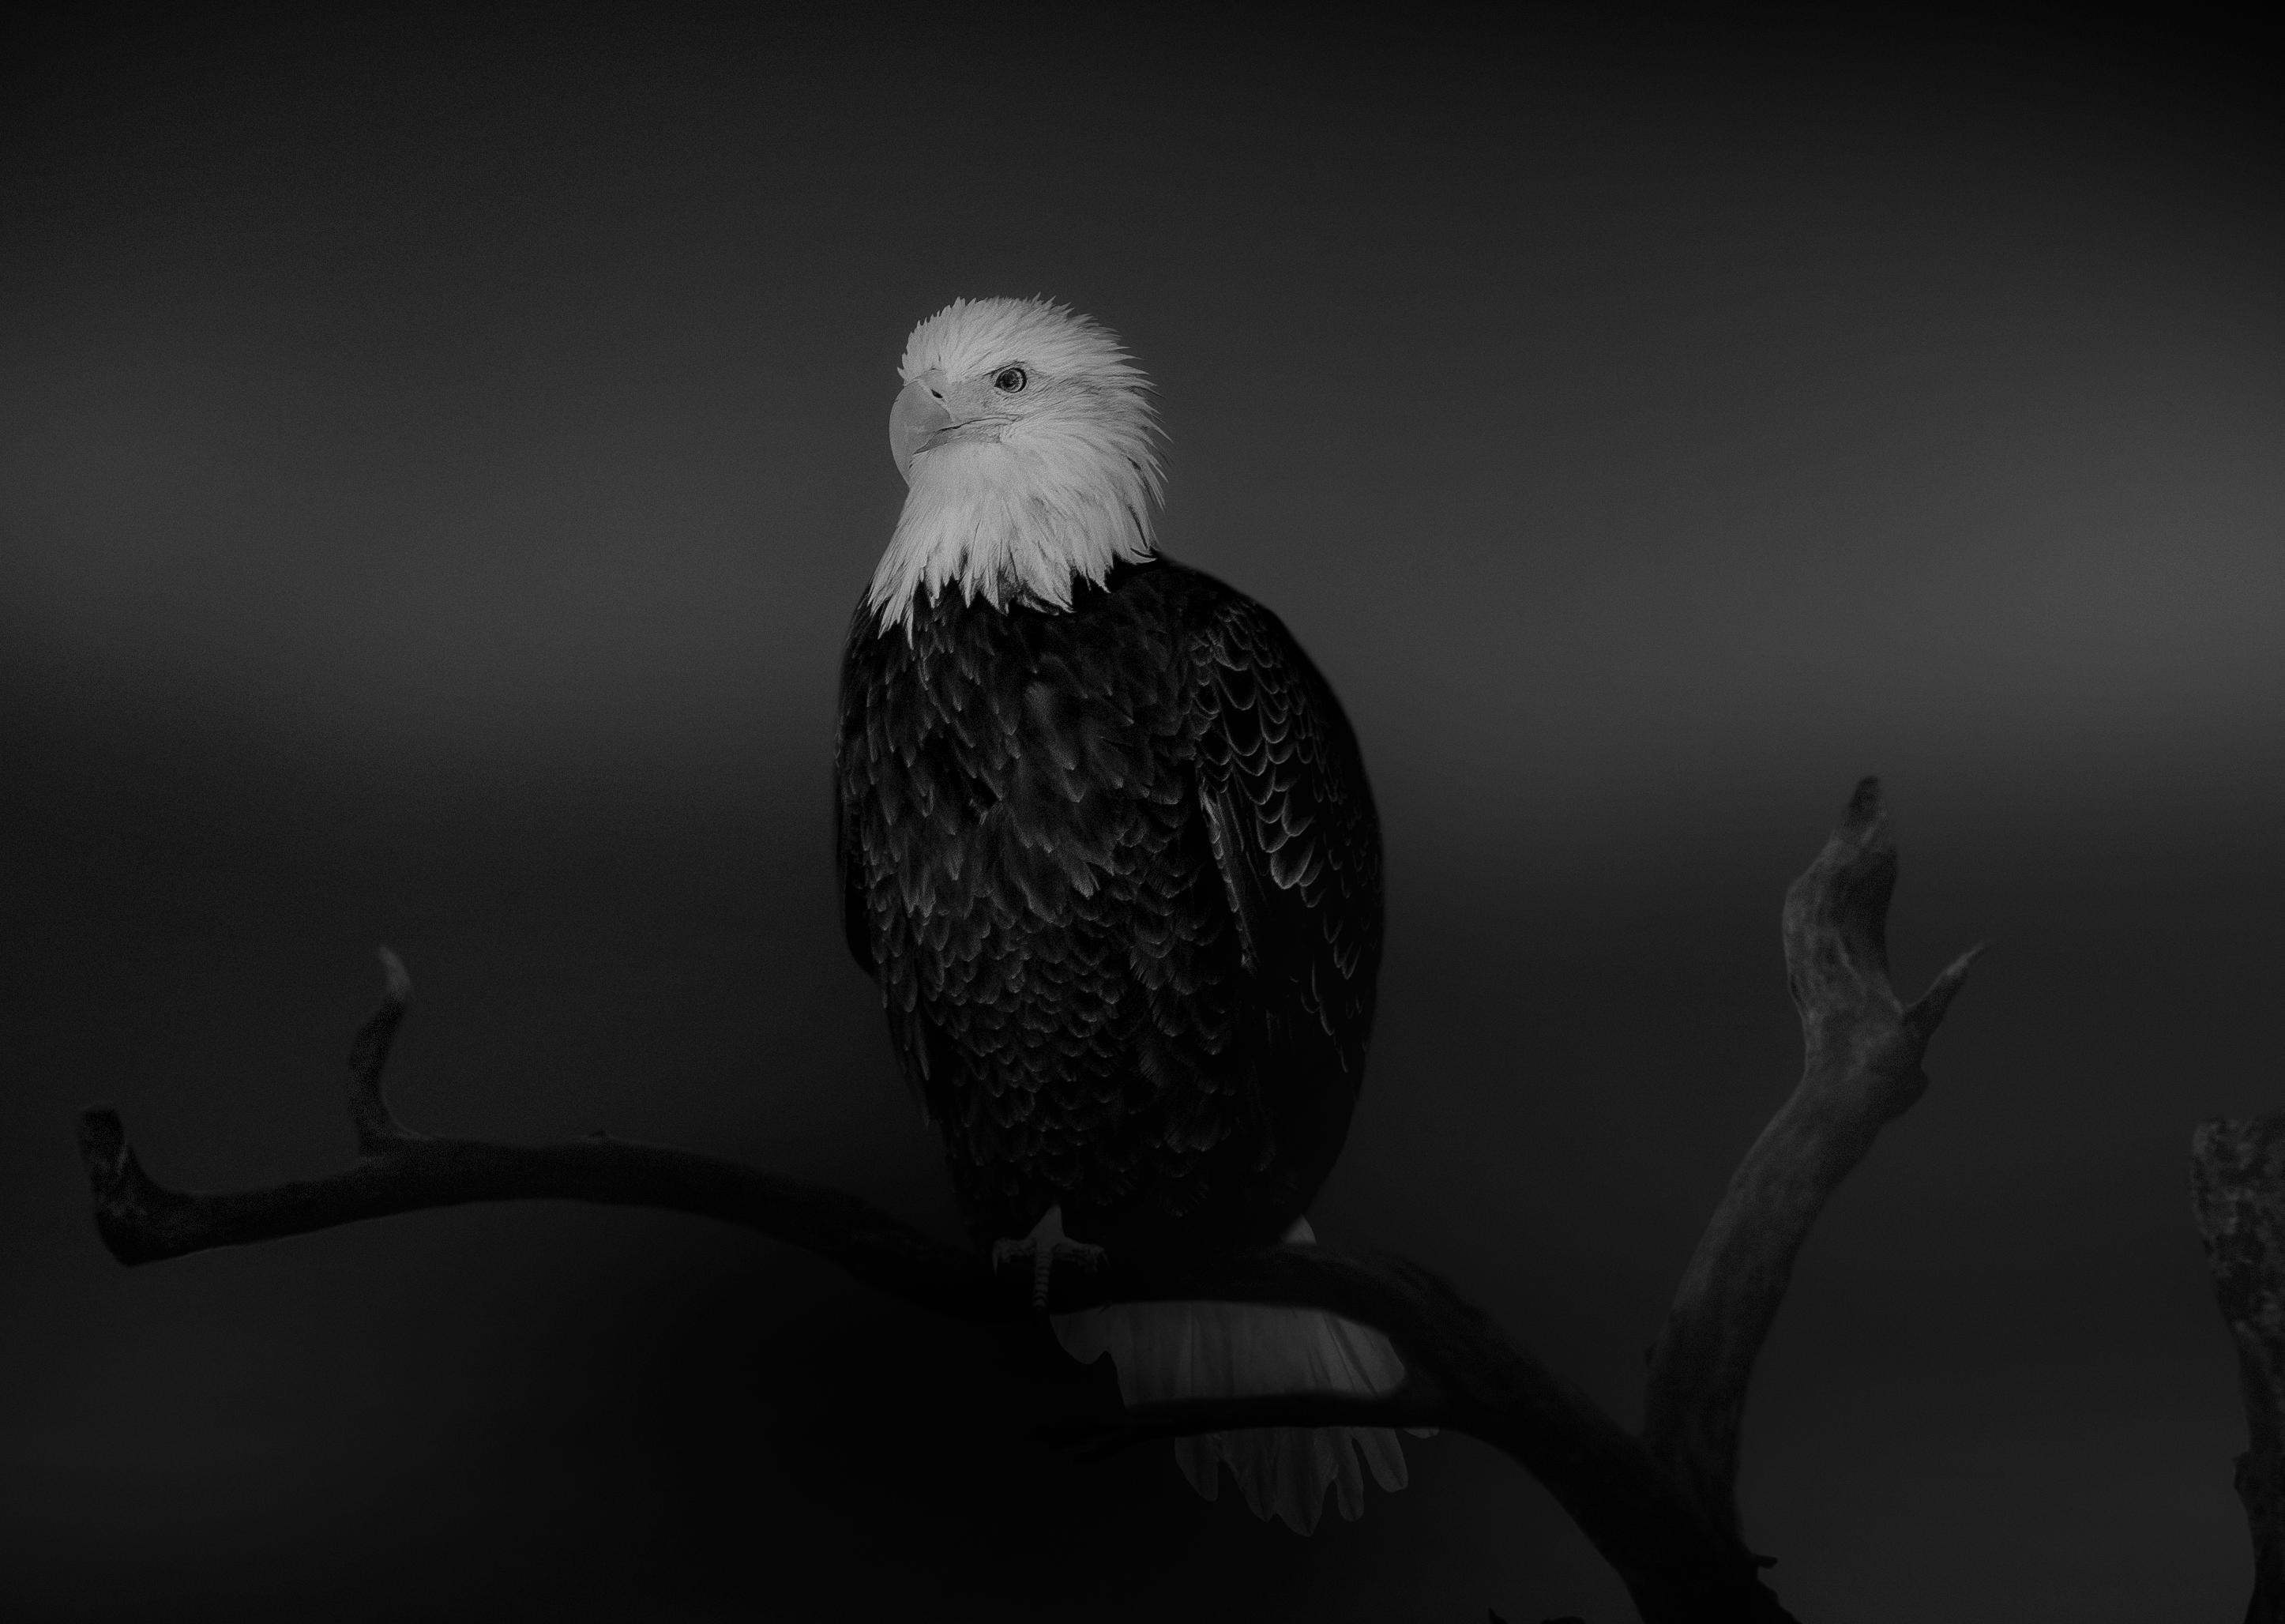 "Bald Eagle" 20x30 - Black & White Photography, Photograph by Shane Russeck